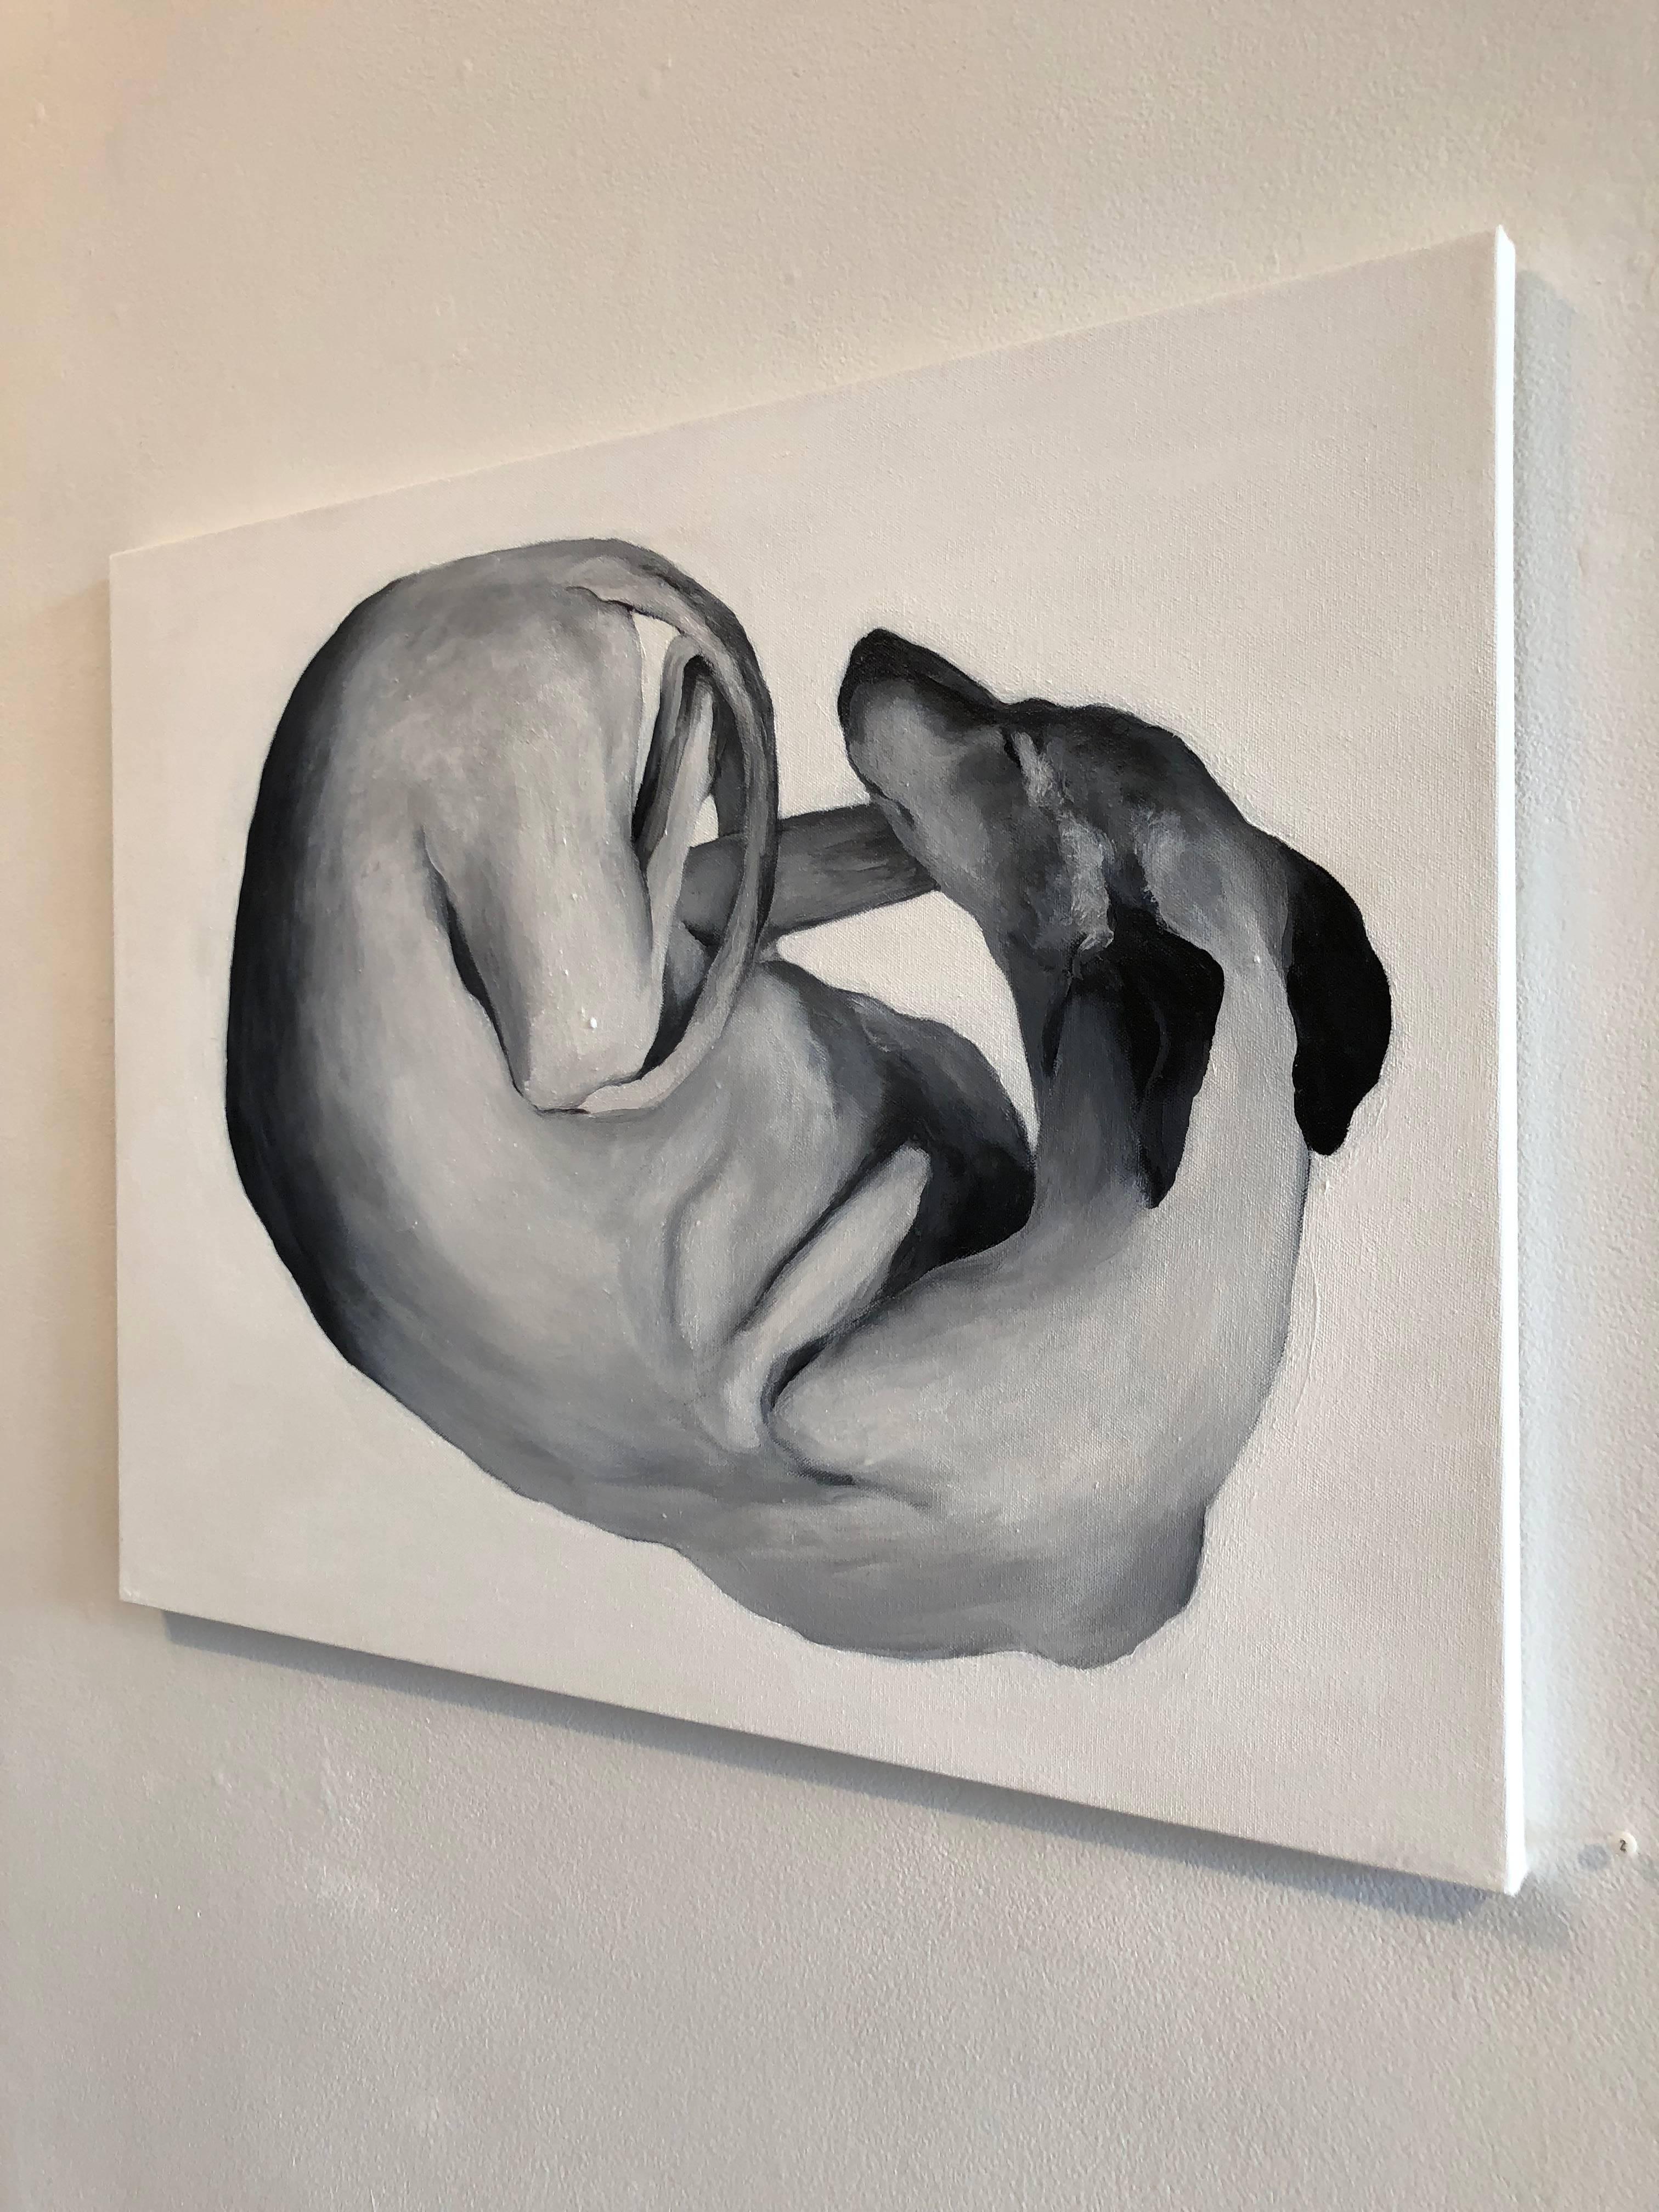 A painting on canvas from a new boy of work by Nataliya Hines titled 'At Rest,' building on the success of her premiere show 'Sighthound' in 2017. The works is an extension of the allegorical conceptualization of socio-sexually dynamics, a topic the